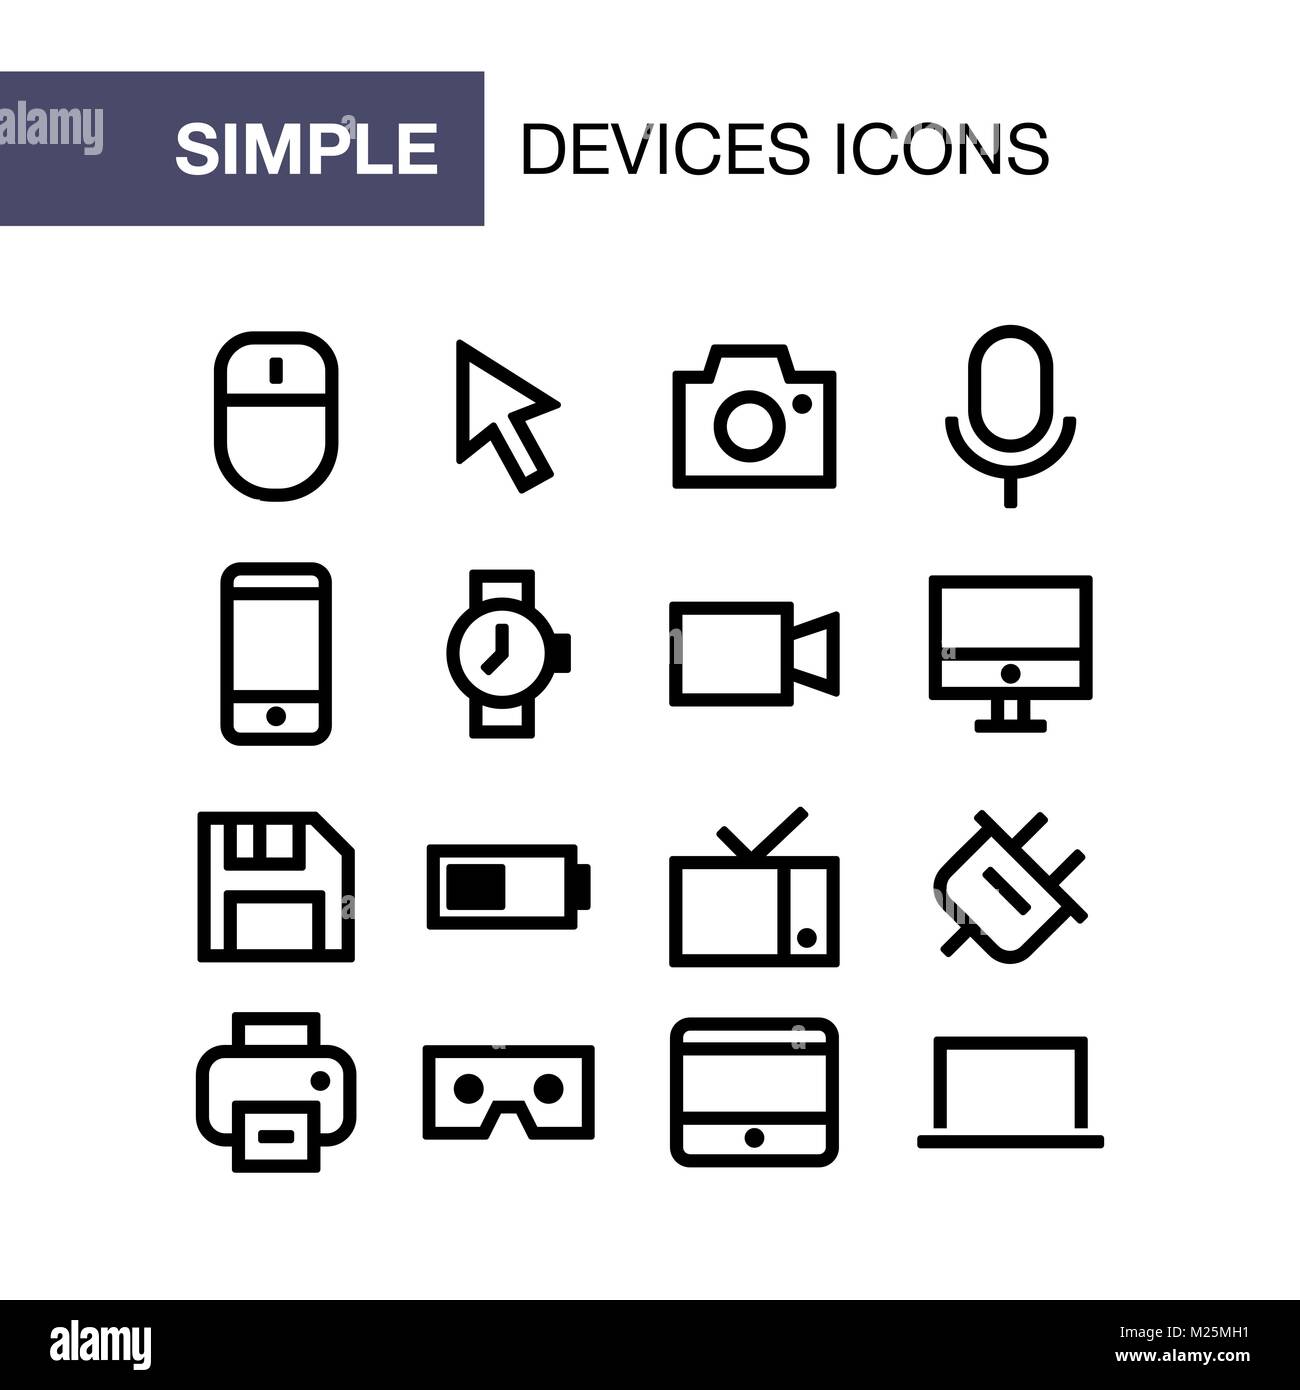 Set of device icons for simple flat style ui design. Stock Vector